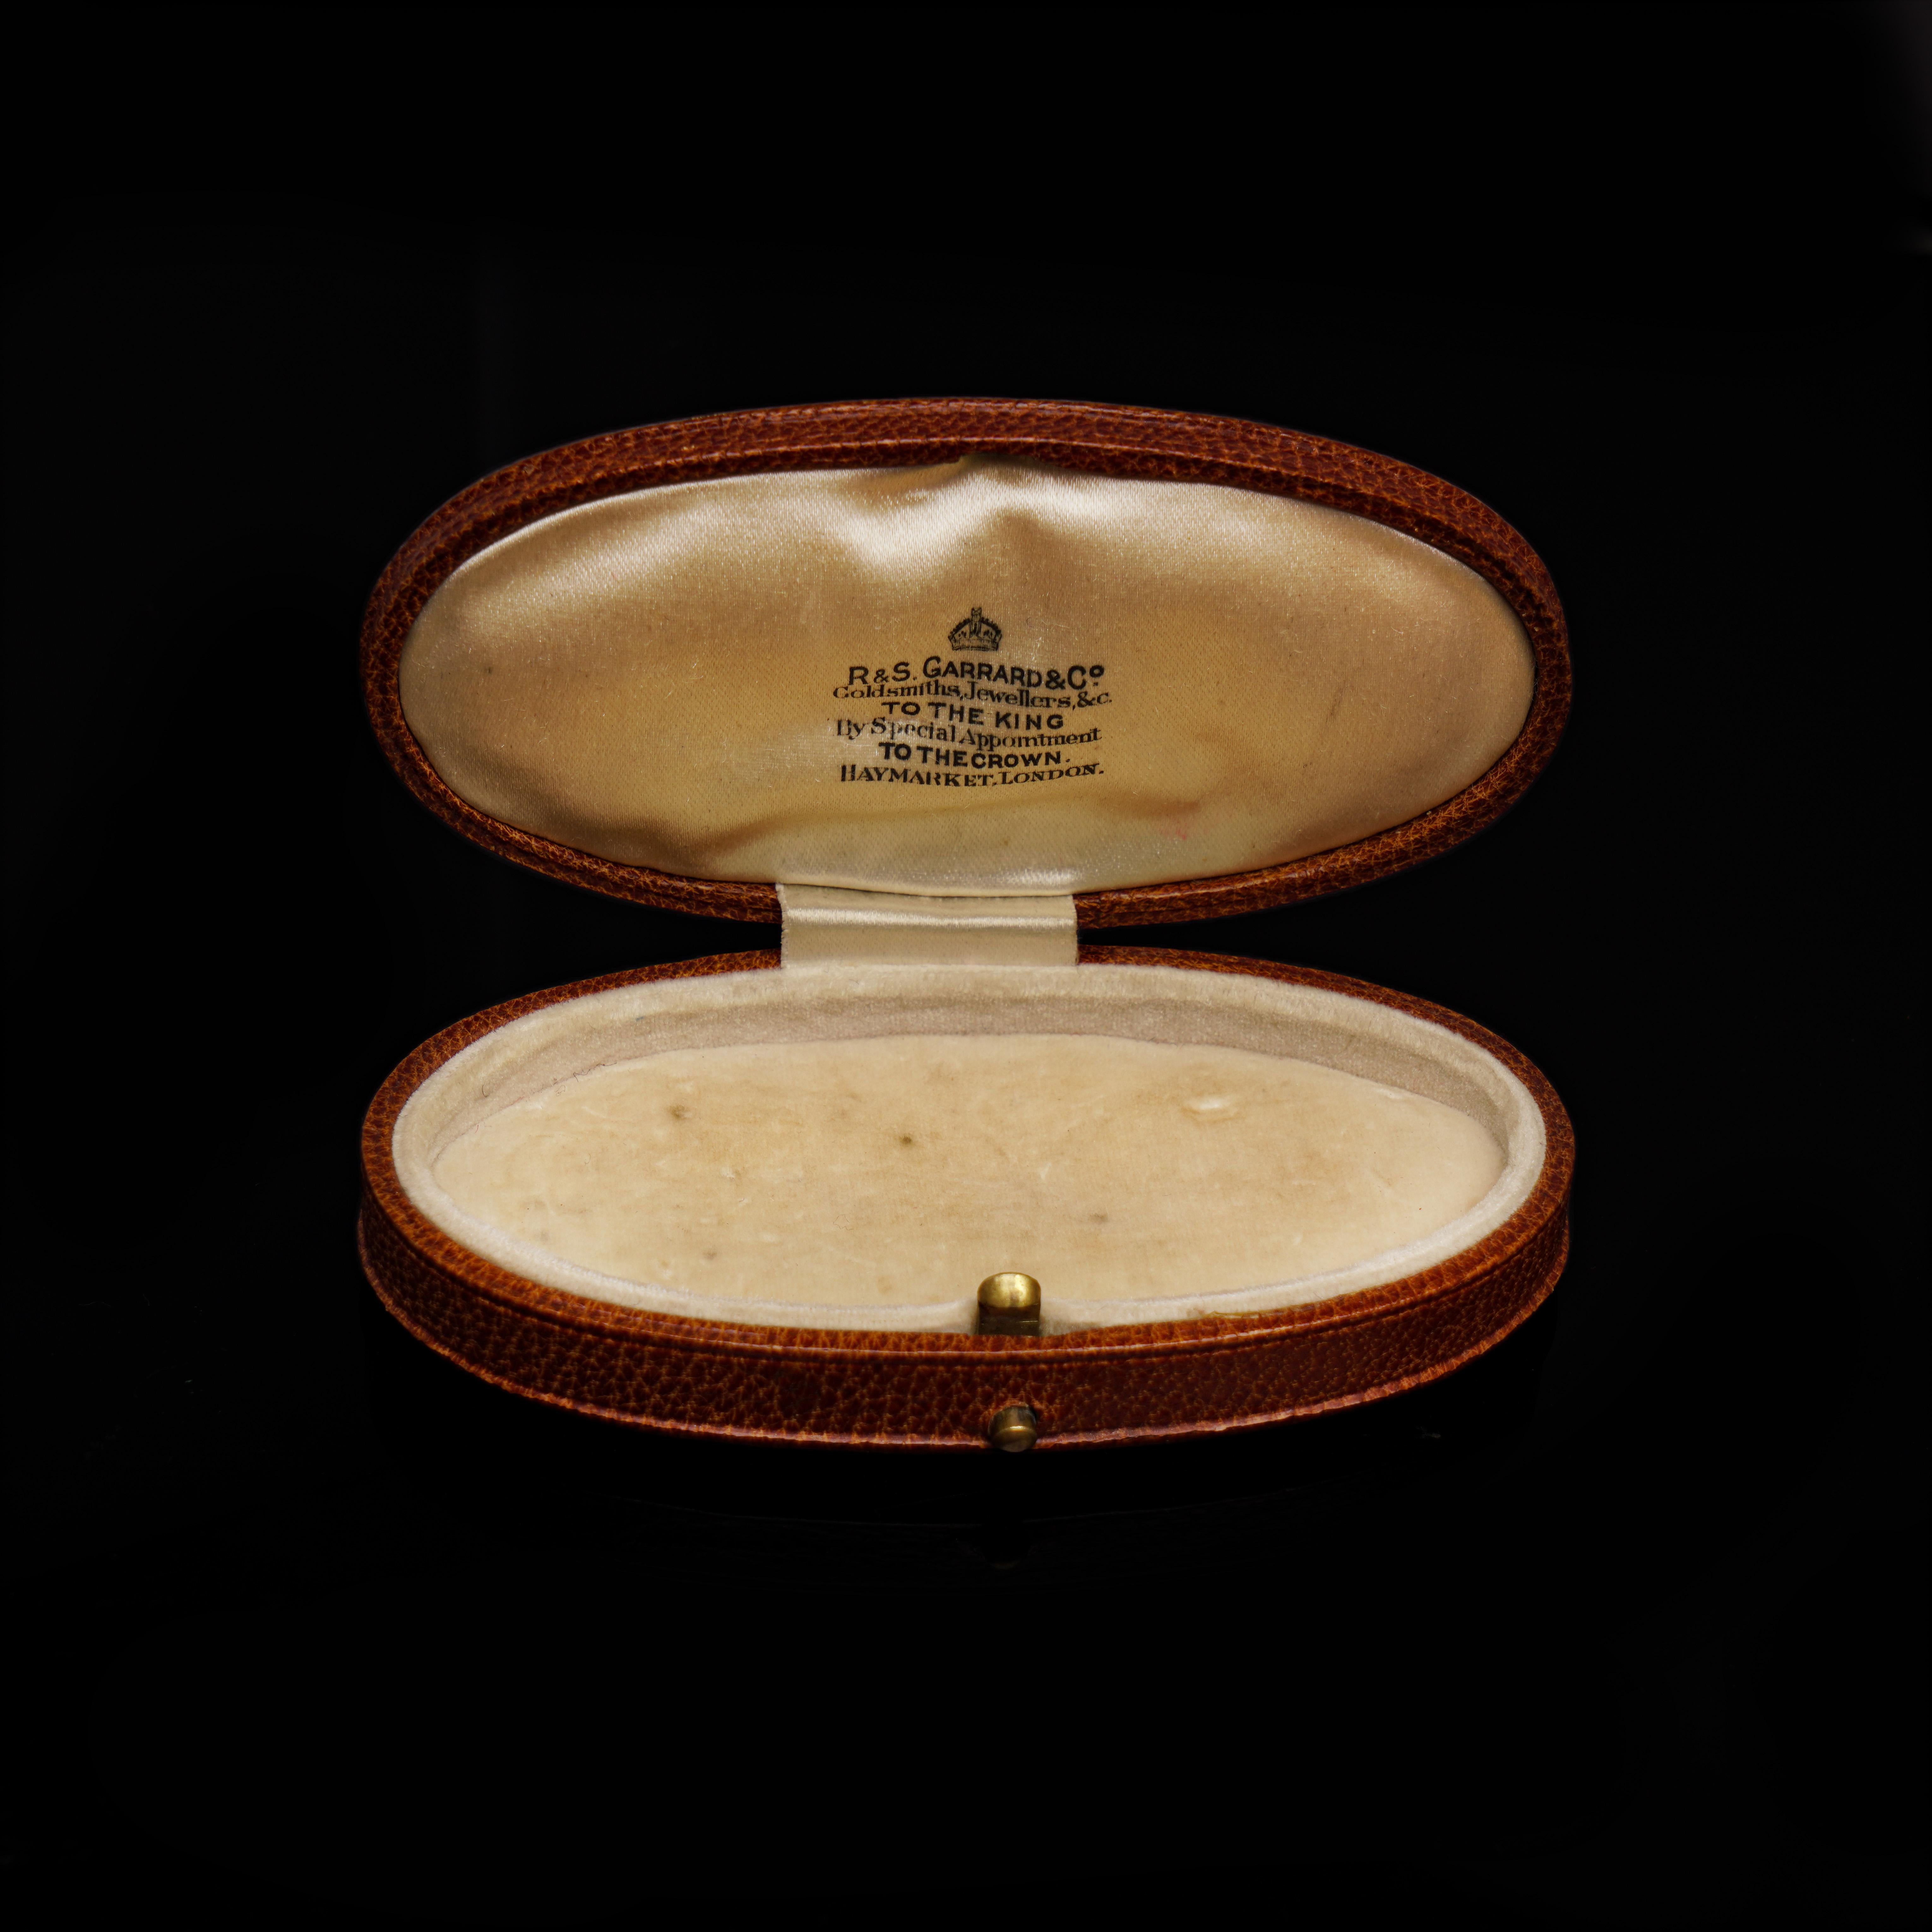 R.&S. Garrard & Co., To the King By Special Appointment, Haymarket, London, 1910

Dimensions:
Length x width x depth: 9.5 cm x 4.8 x 2 cm 

Weight: 27 grams 

Condition: Box is pre-owned, with minor signs of usage, good condition overall. 

About